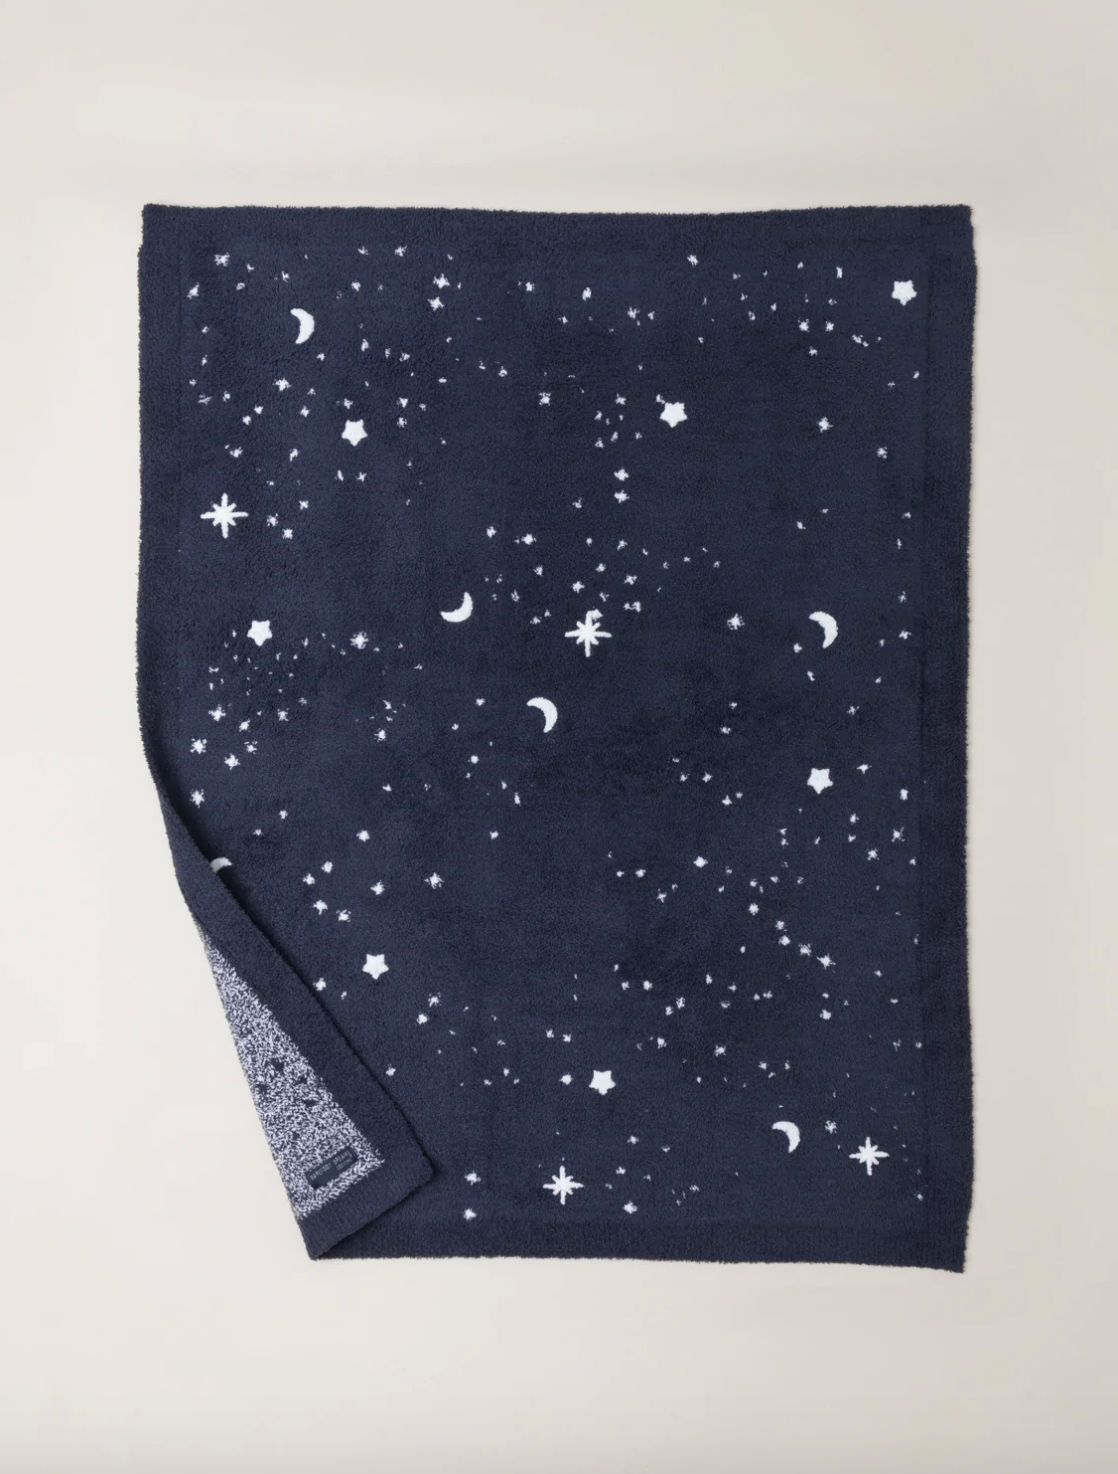 Barefoot Dream CozyChic Starry Blanket Blankets & Throws in  at Wrapsody